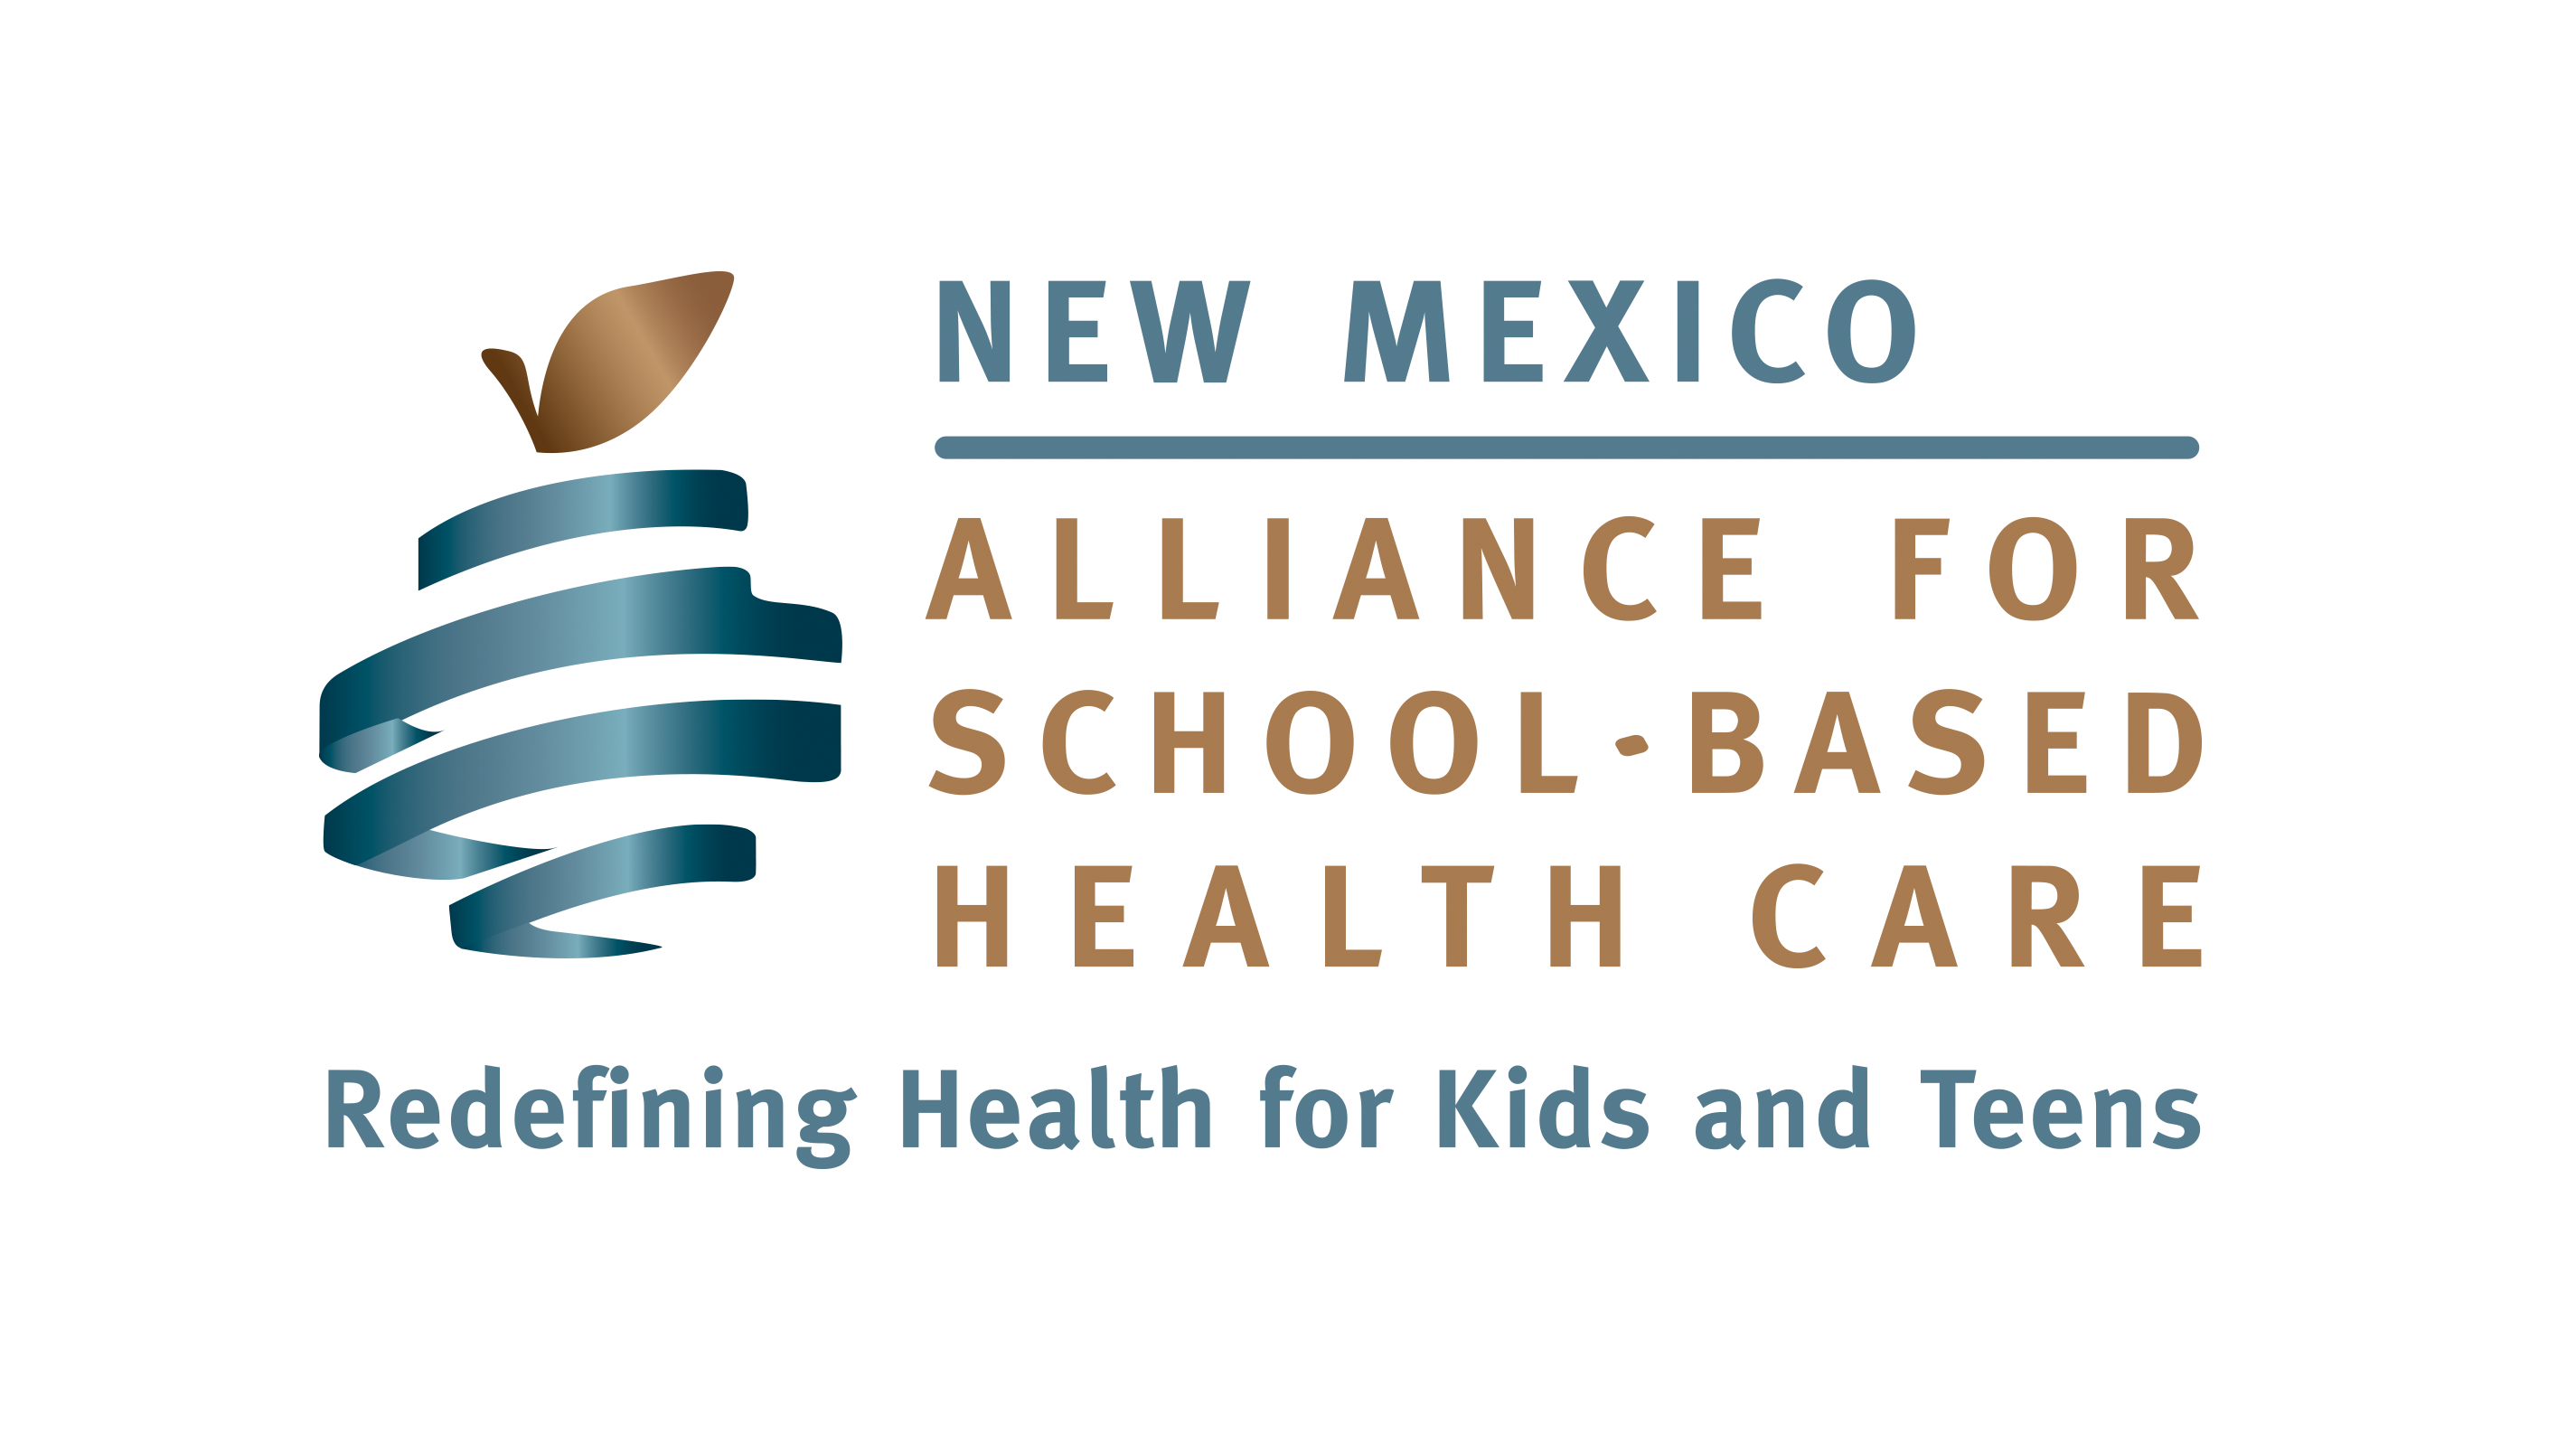 New Mexico Alliance for School-Based Health Care logo